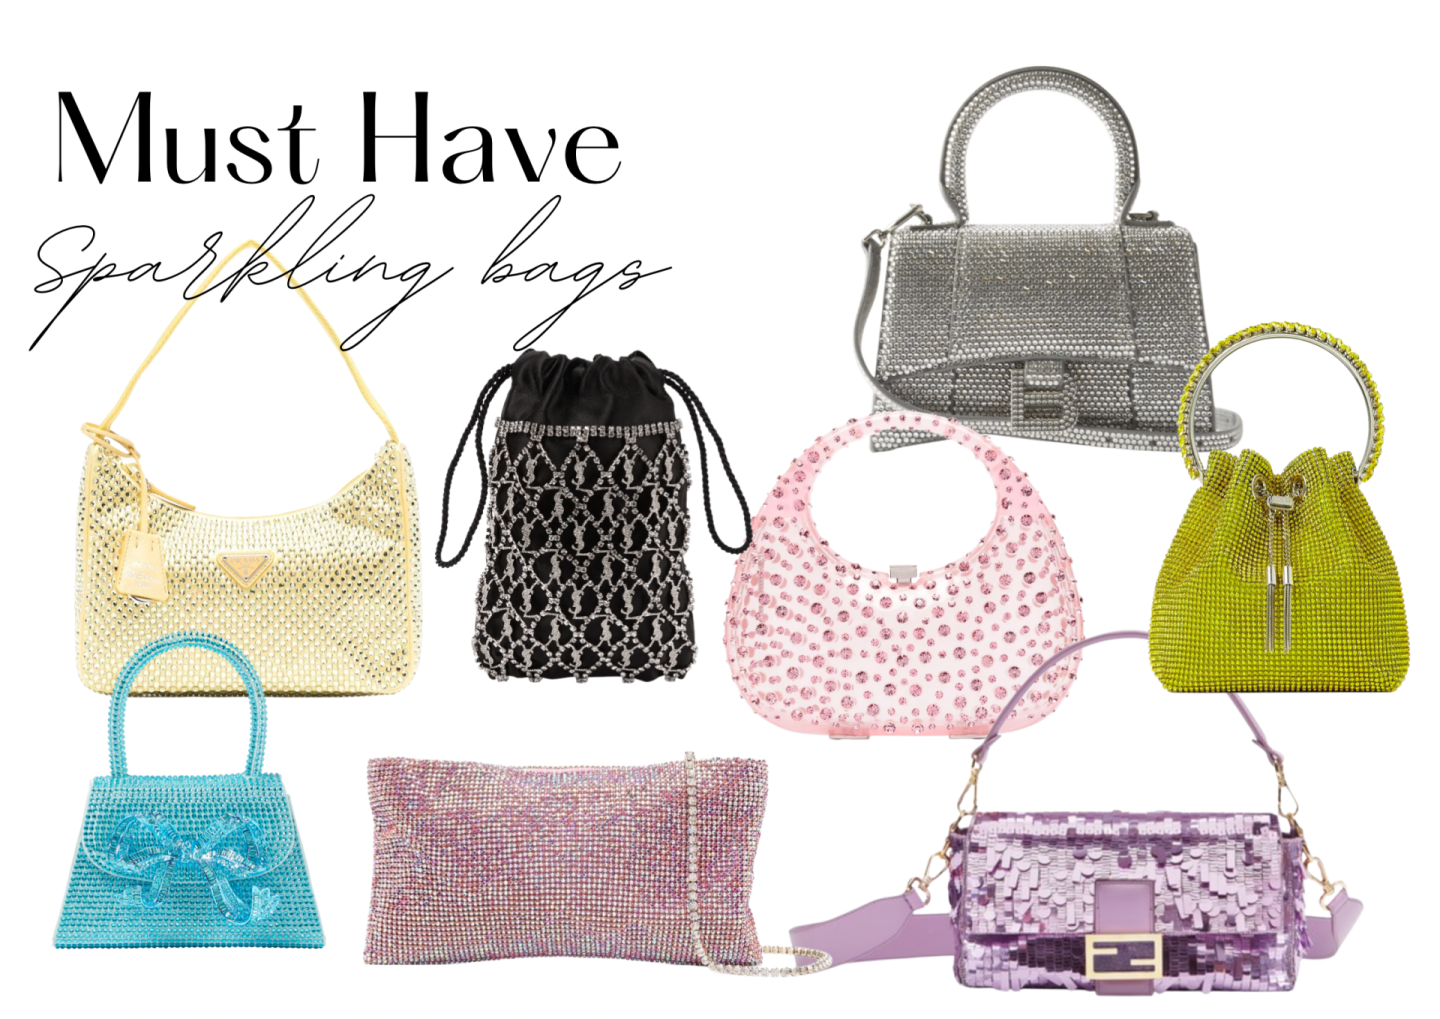 NEW IN SPARKLING BAGS